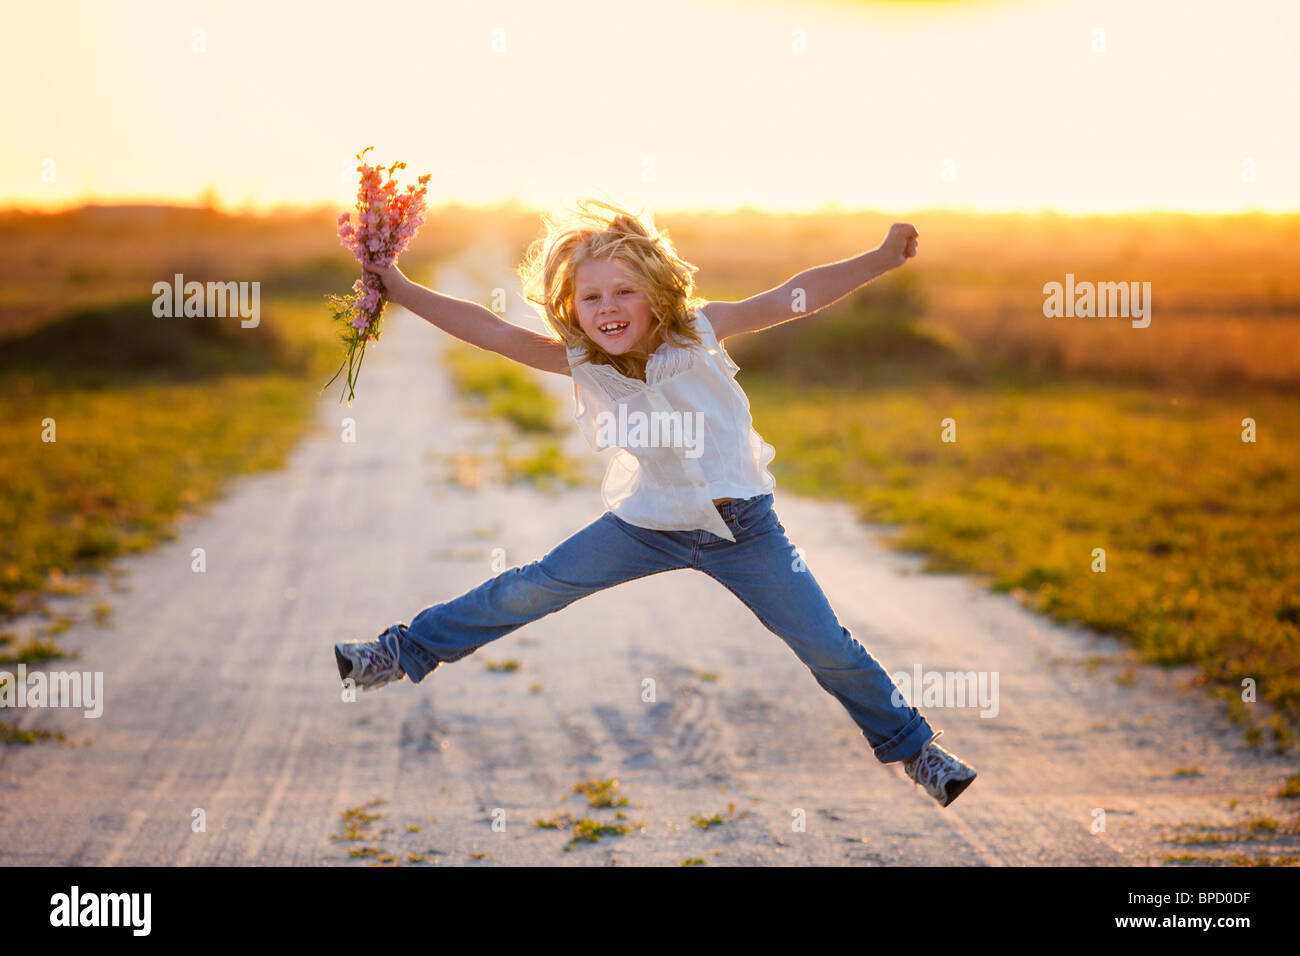 Young girl holding flowers jumping in air Stock Photo